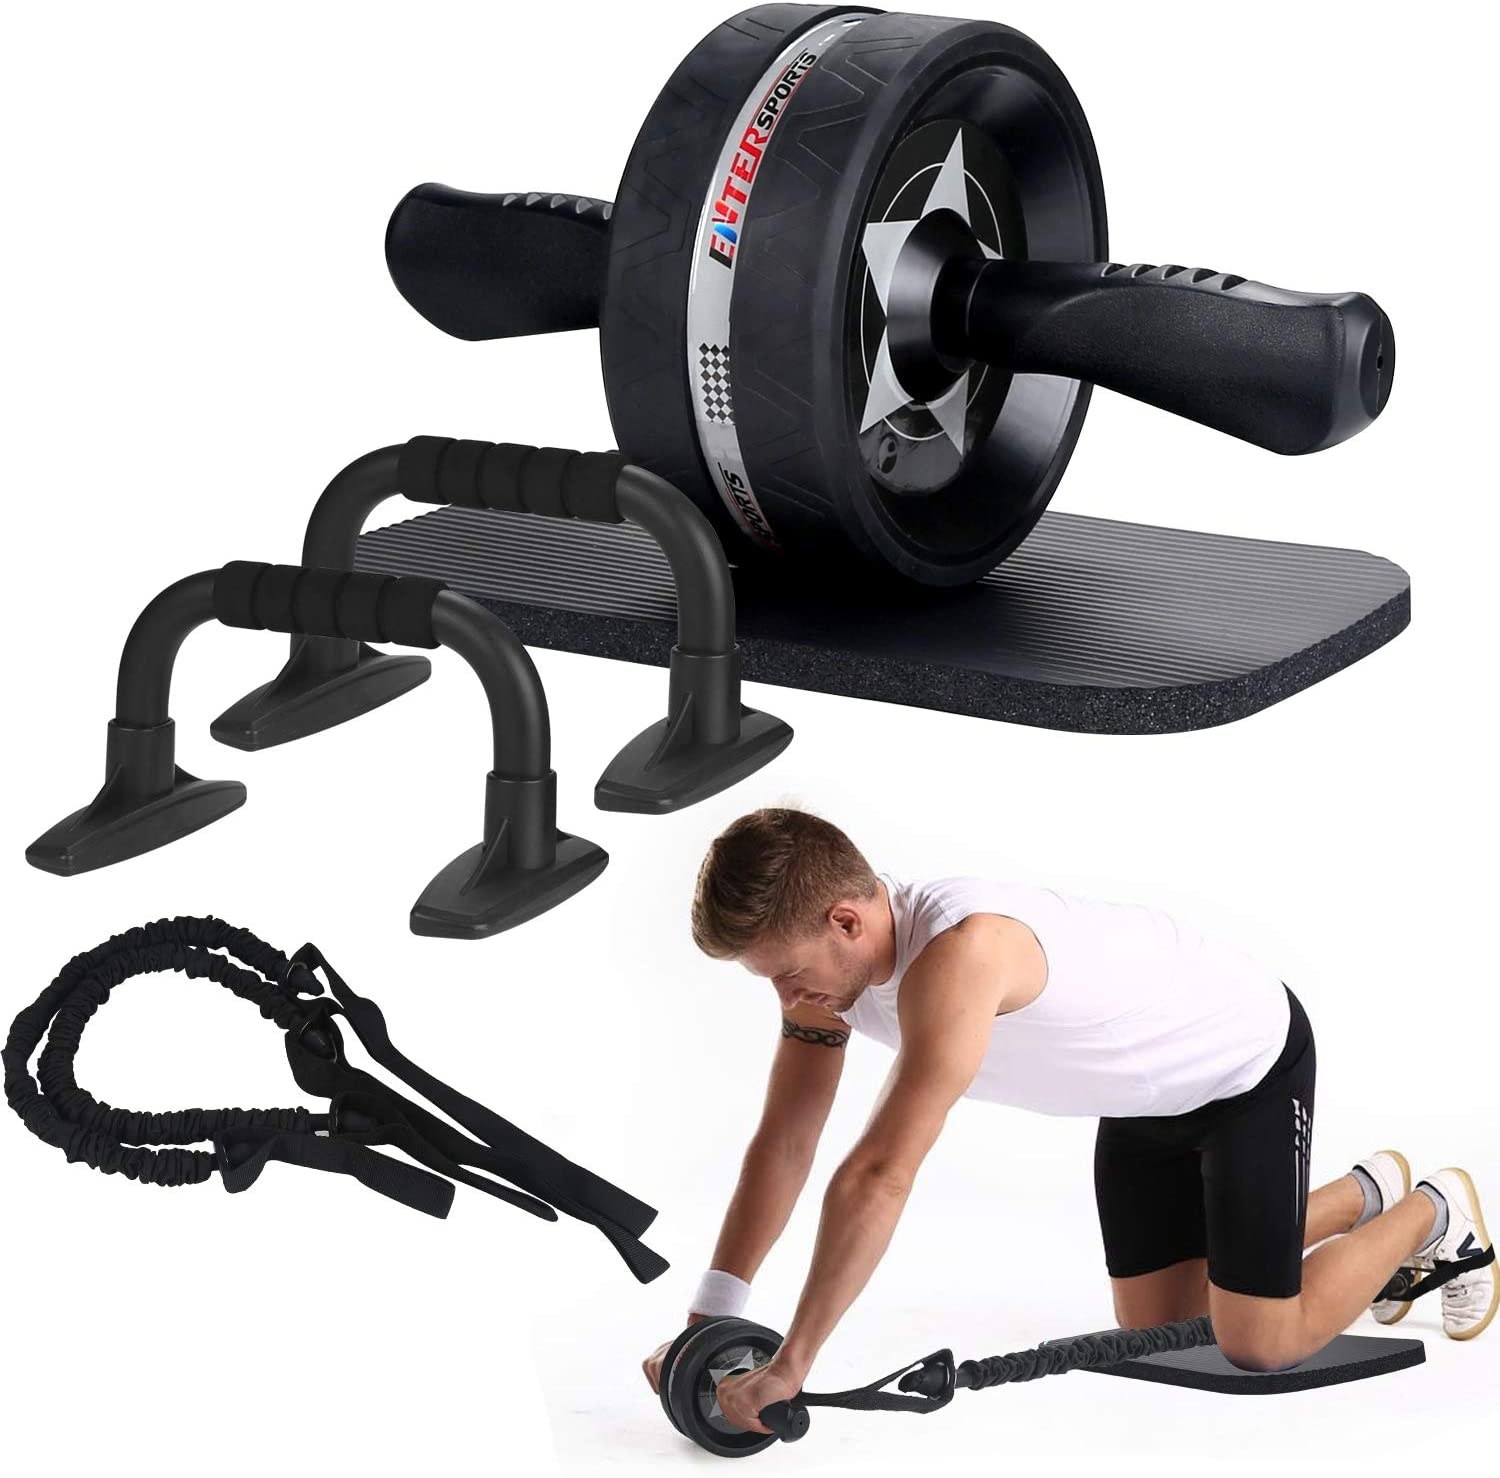 The kit and a model kneeling on the pad with their feet looped into the resistance bands, which are attached to the ab roller